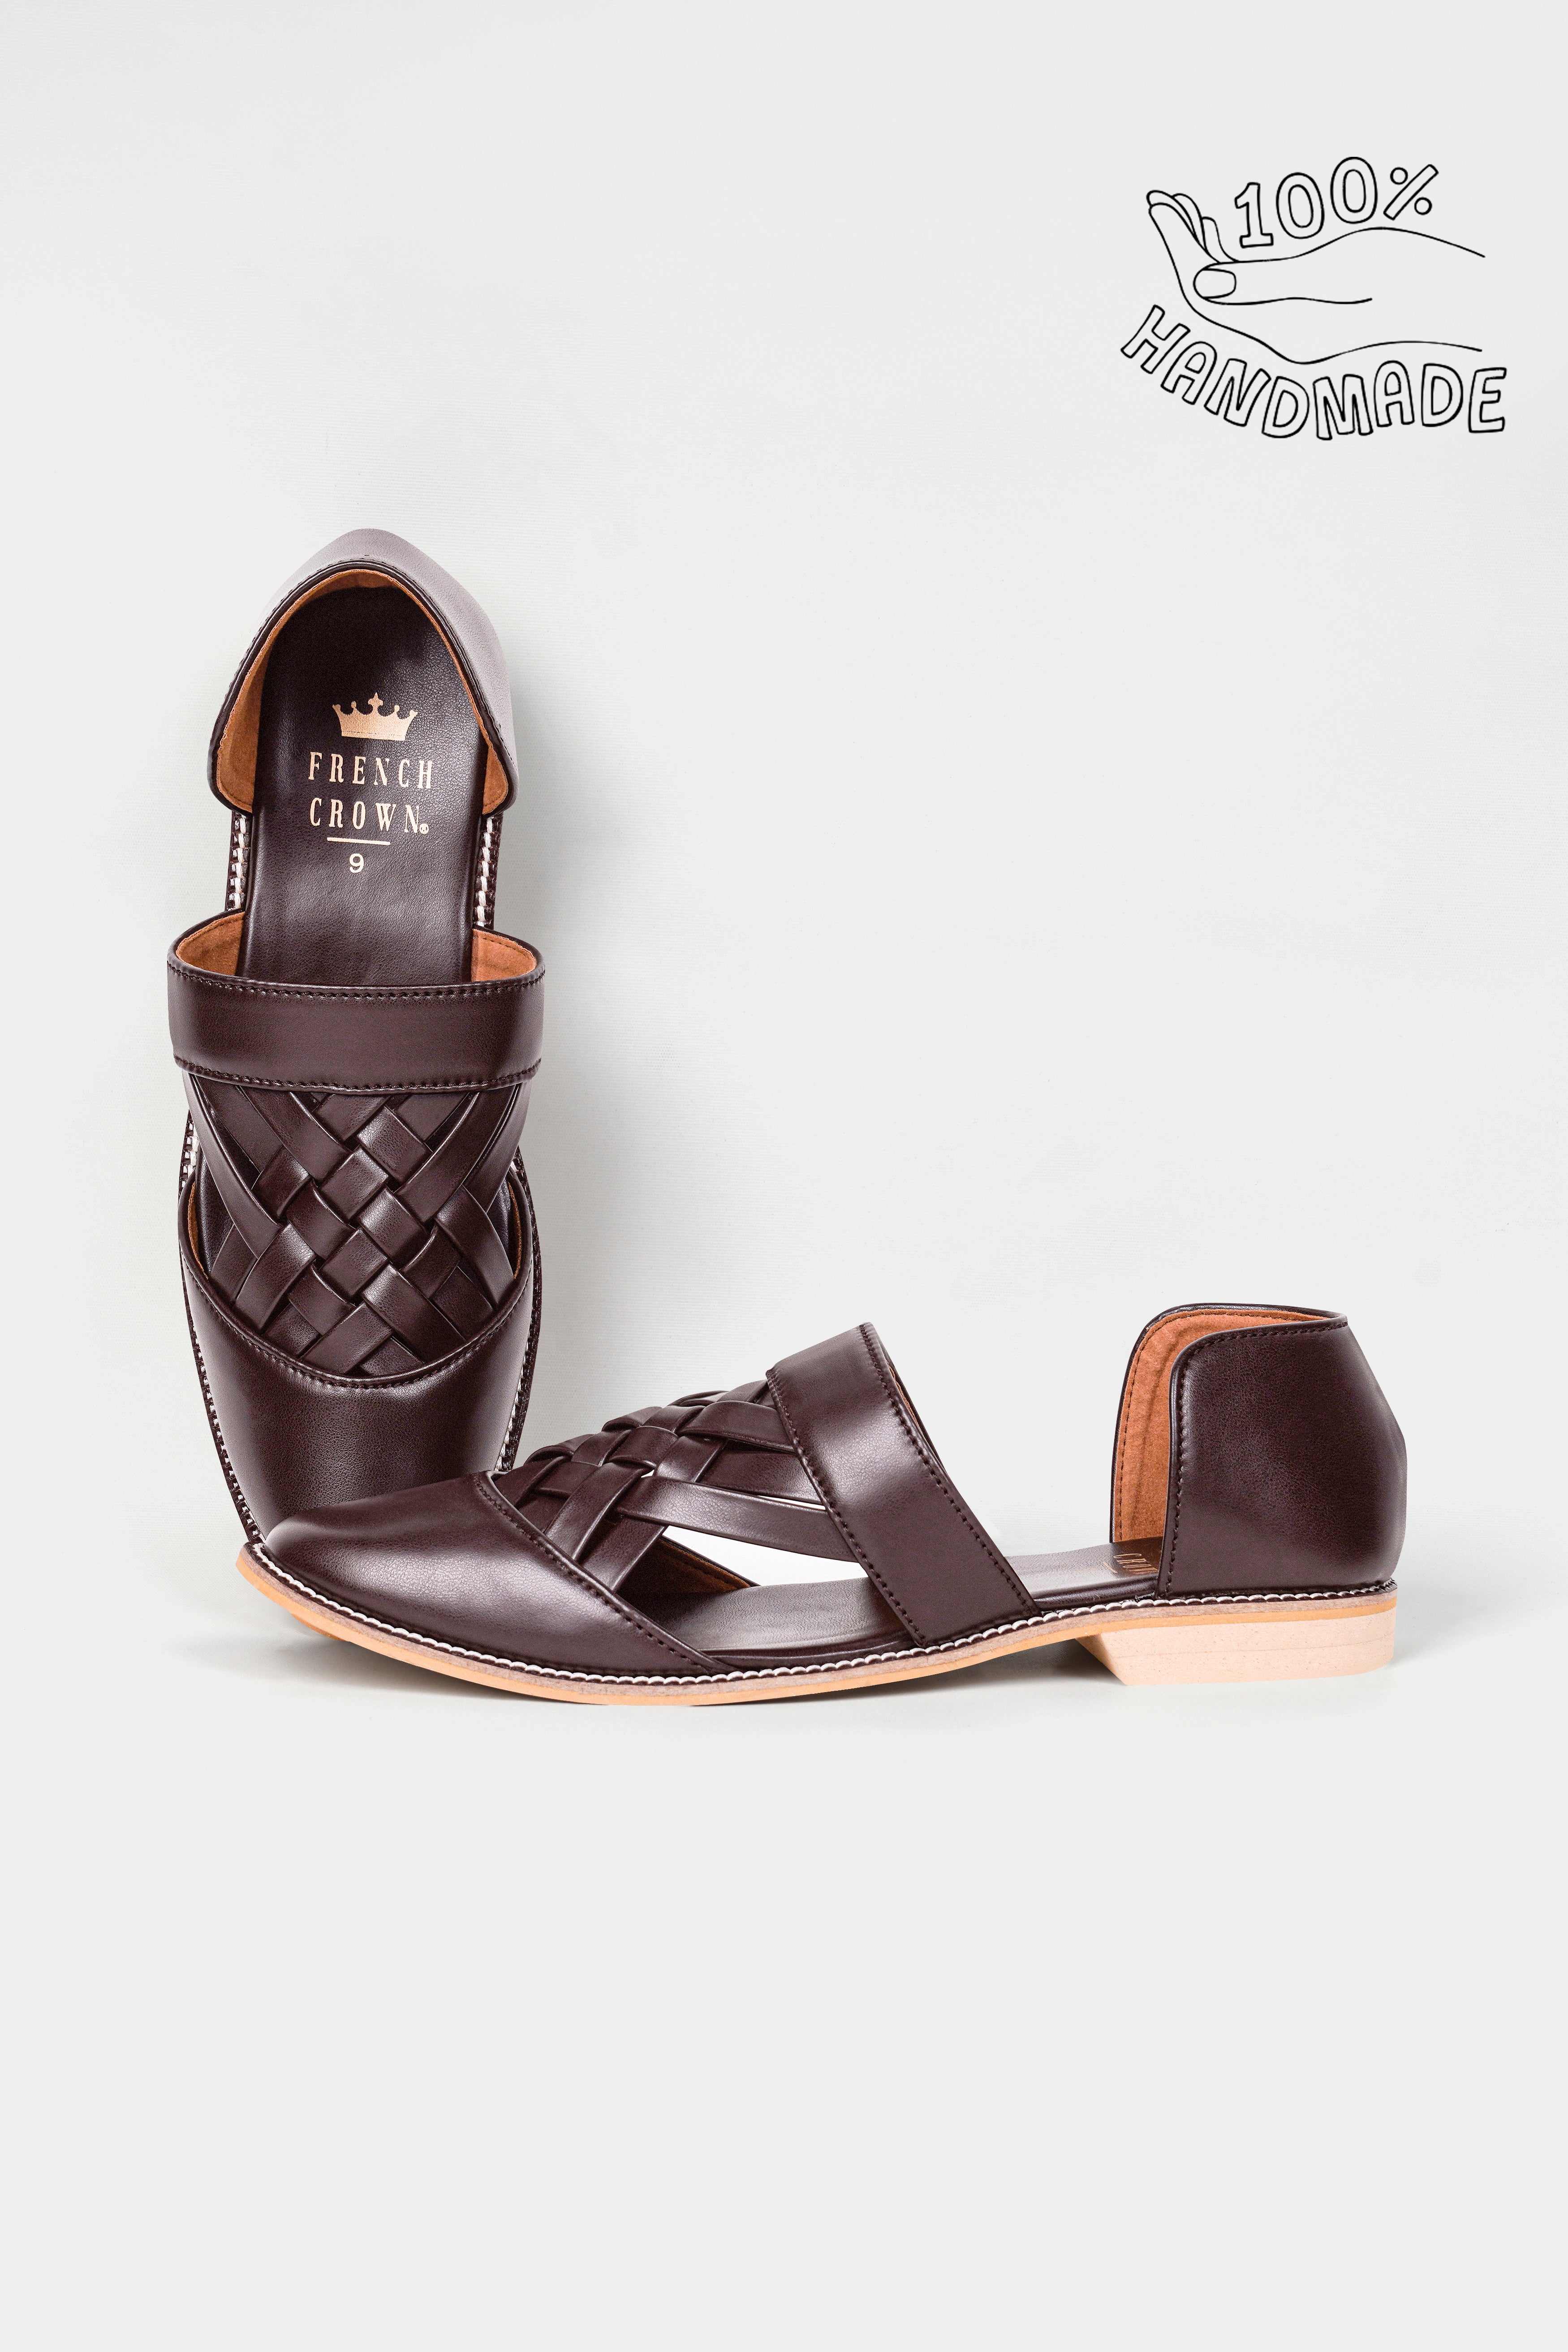 Dark Brown Criss Cross Vegan Leather Hand Stitched Pathanis Sandal FT122-6, FT122-7, FT122-8, FT122-9, FT122-10, FT122-11